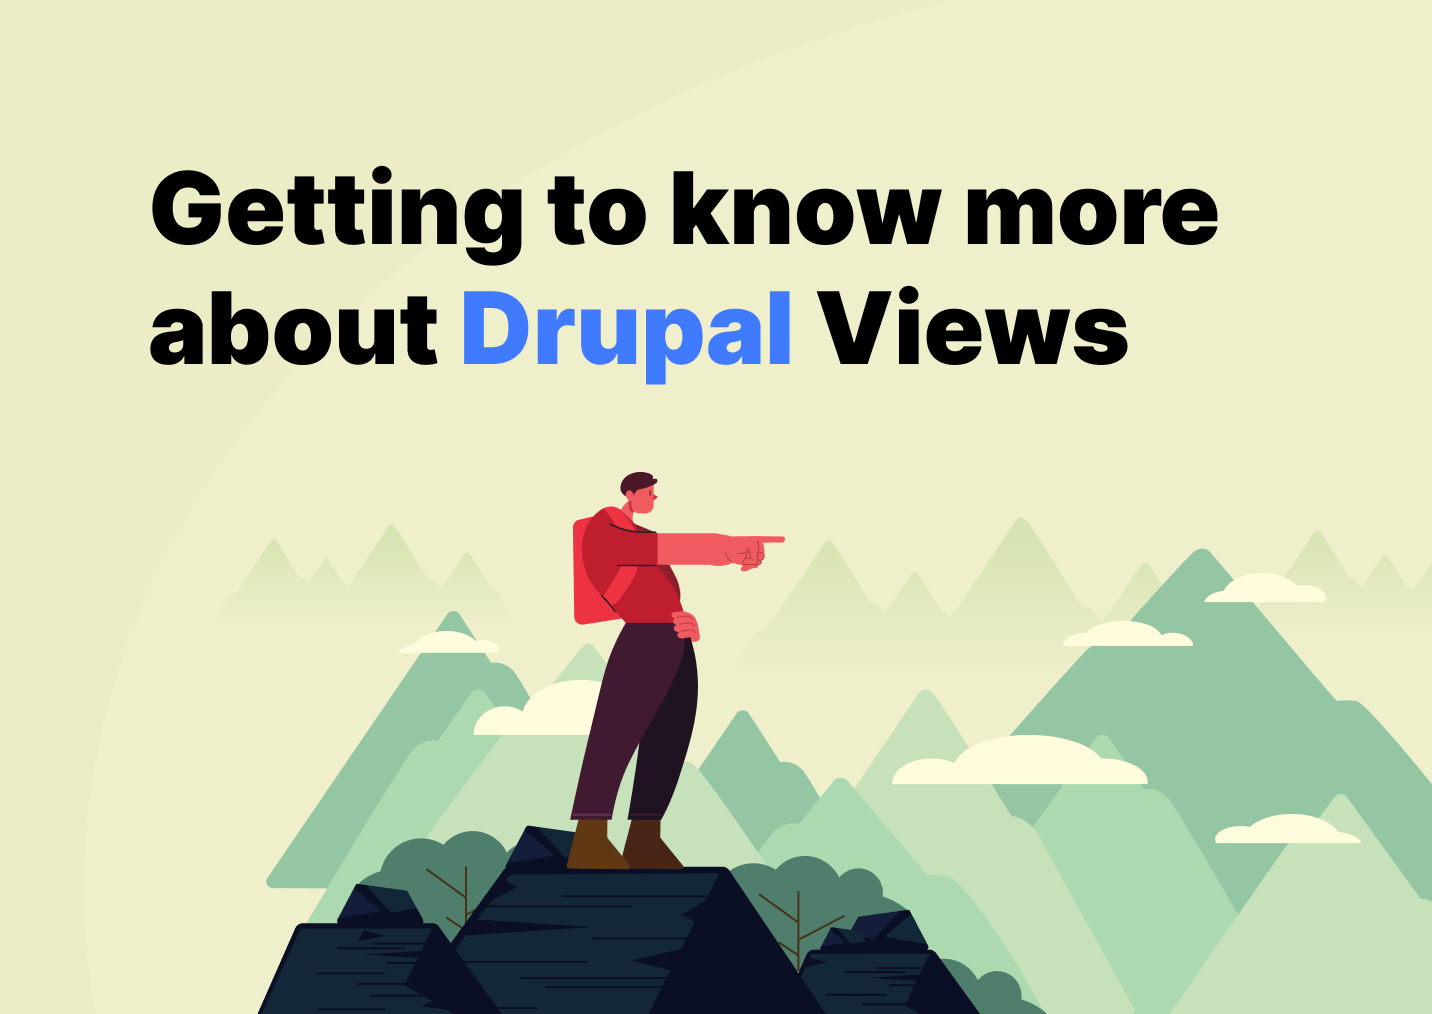 Getting to know more about Drupal Views